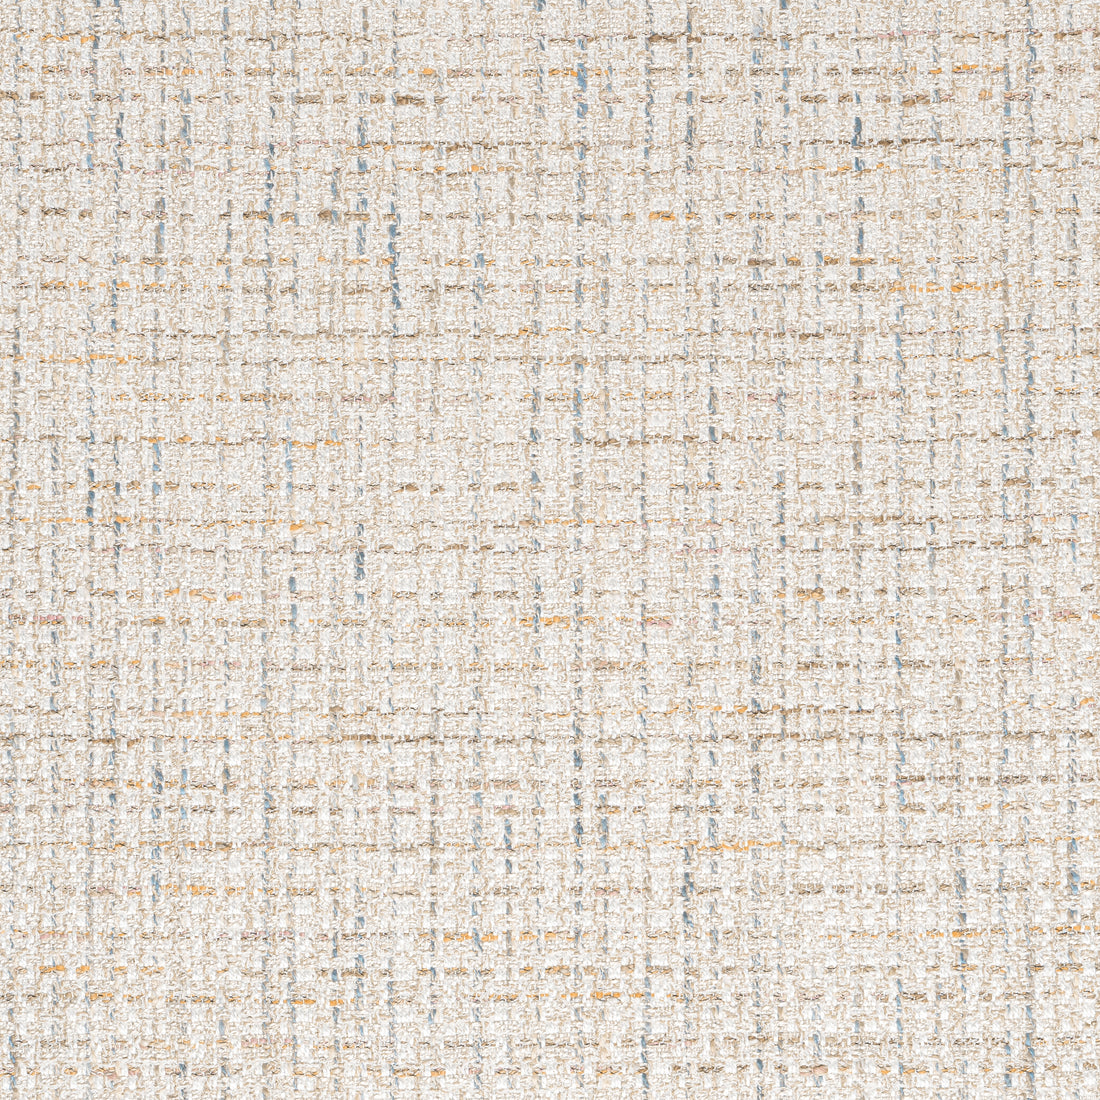 Emilio fabric in parchment color - pattern number W80952 - by Thibaut in the Dunmore collection